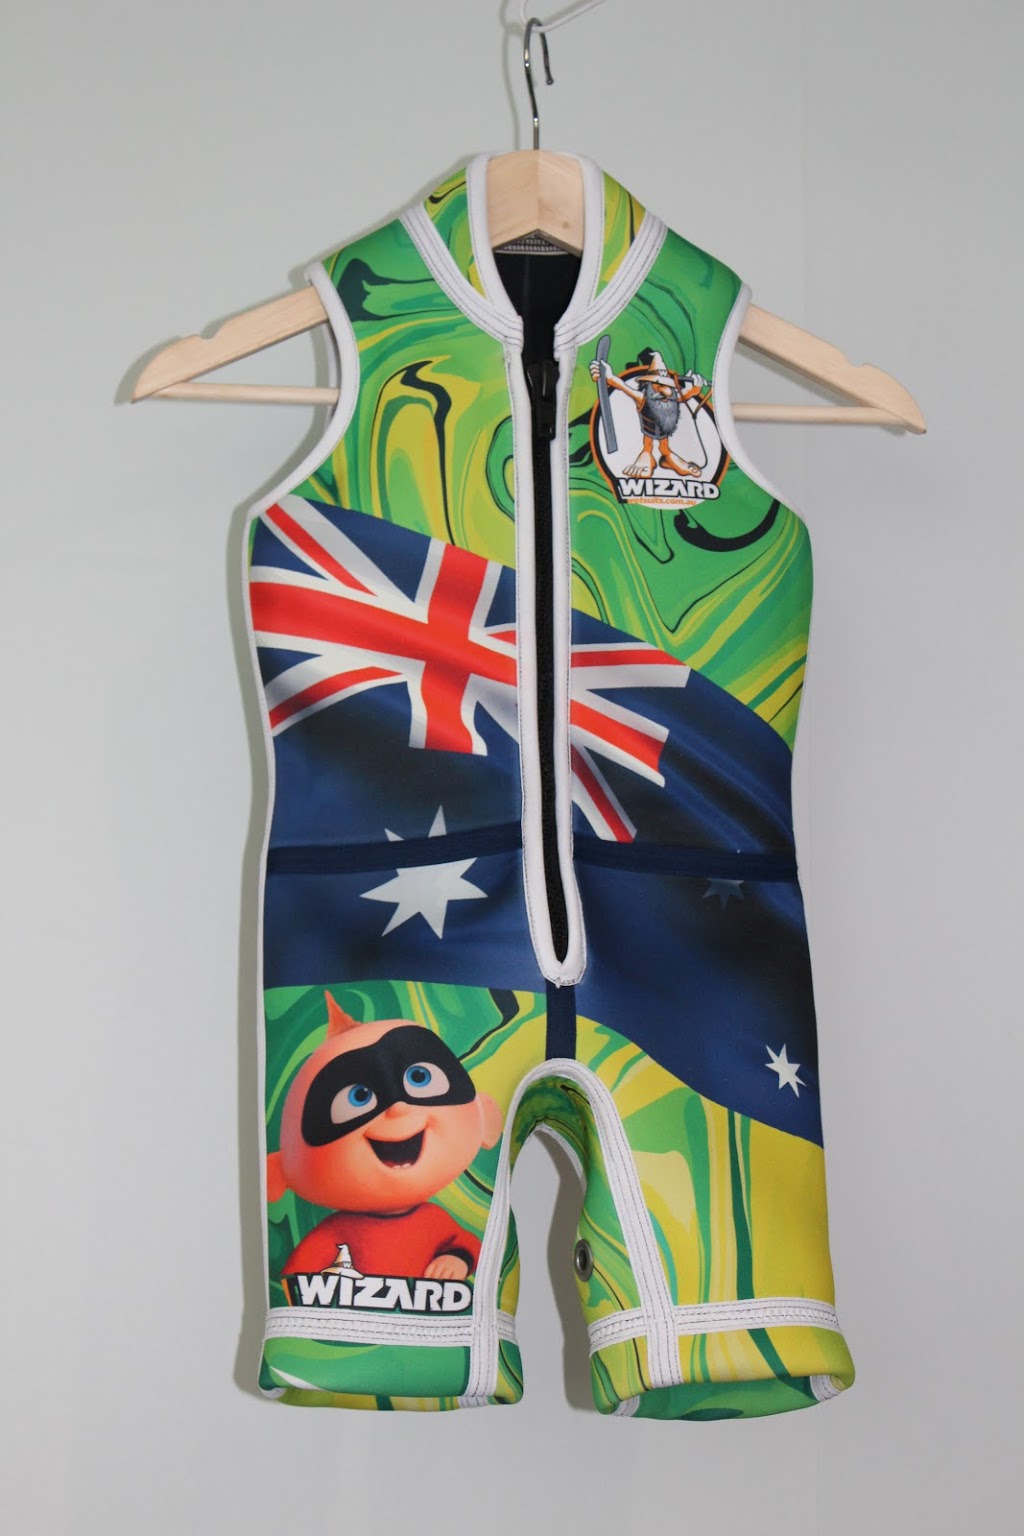 Wizard Wetsuits | store | Unit 3/10-12 Wingate Rd, Mulgrave NSW 2756, Australia | 0279096543 OR +61 2 7909 6543